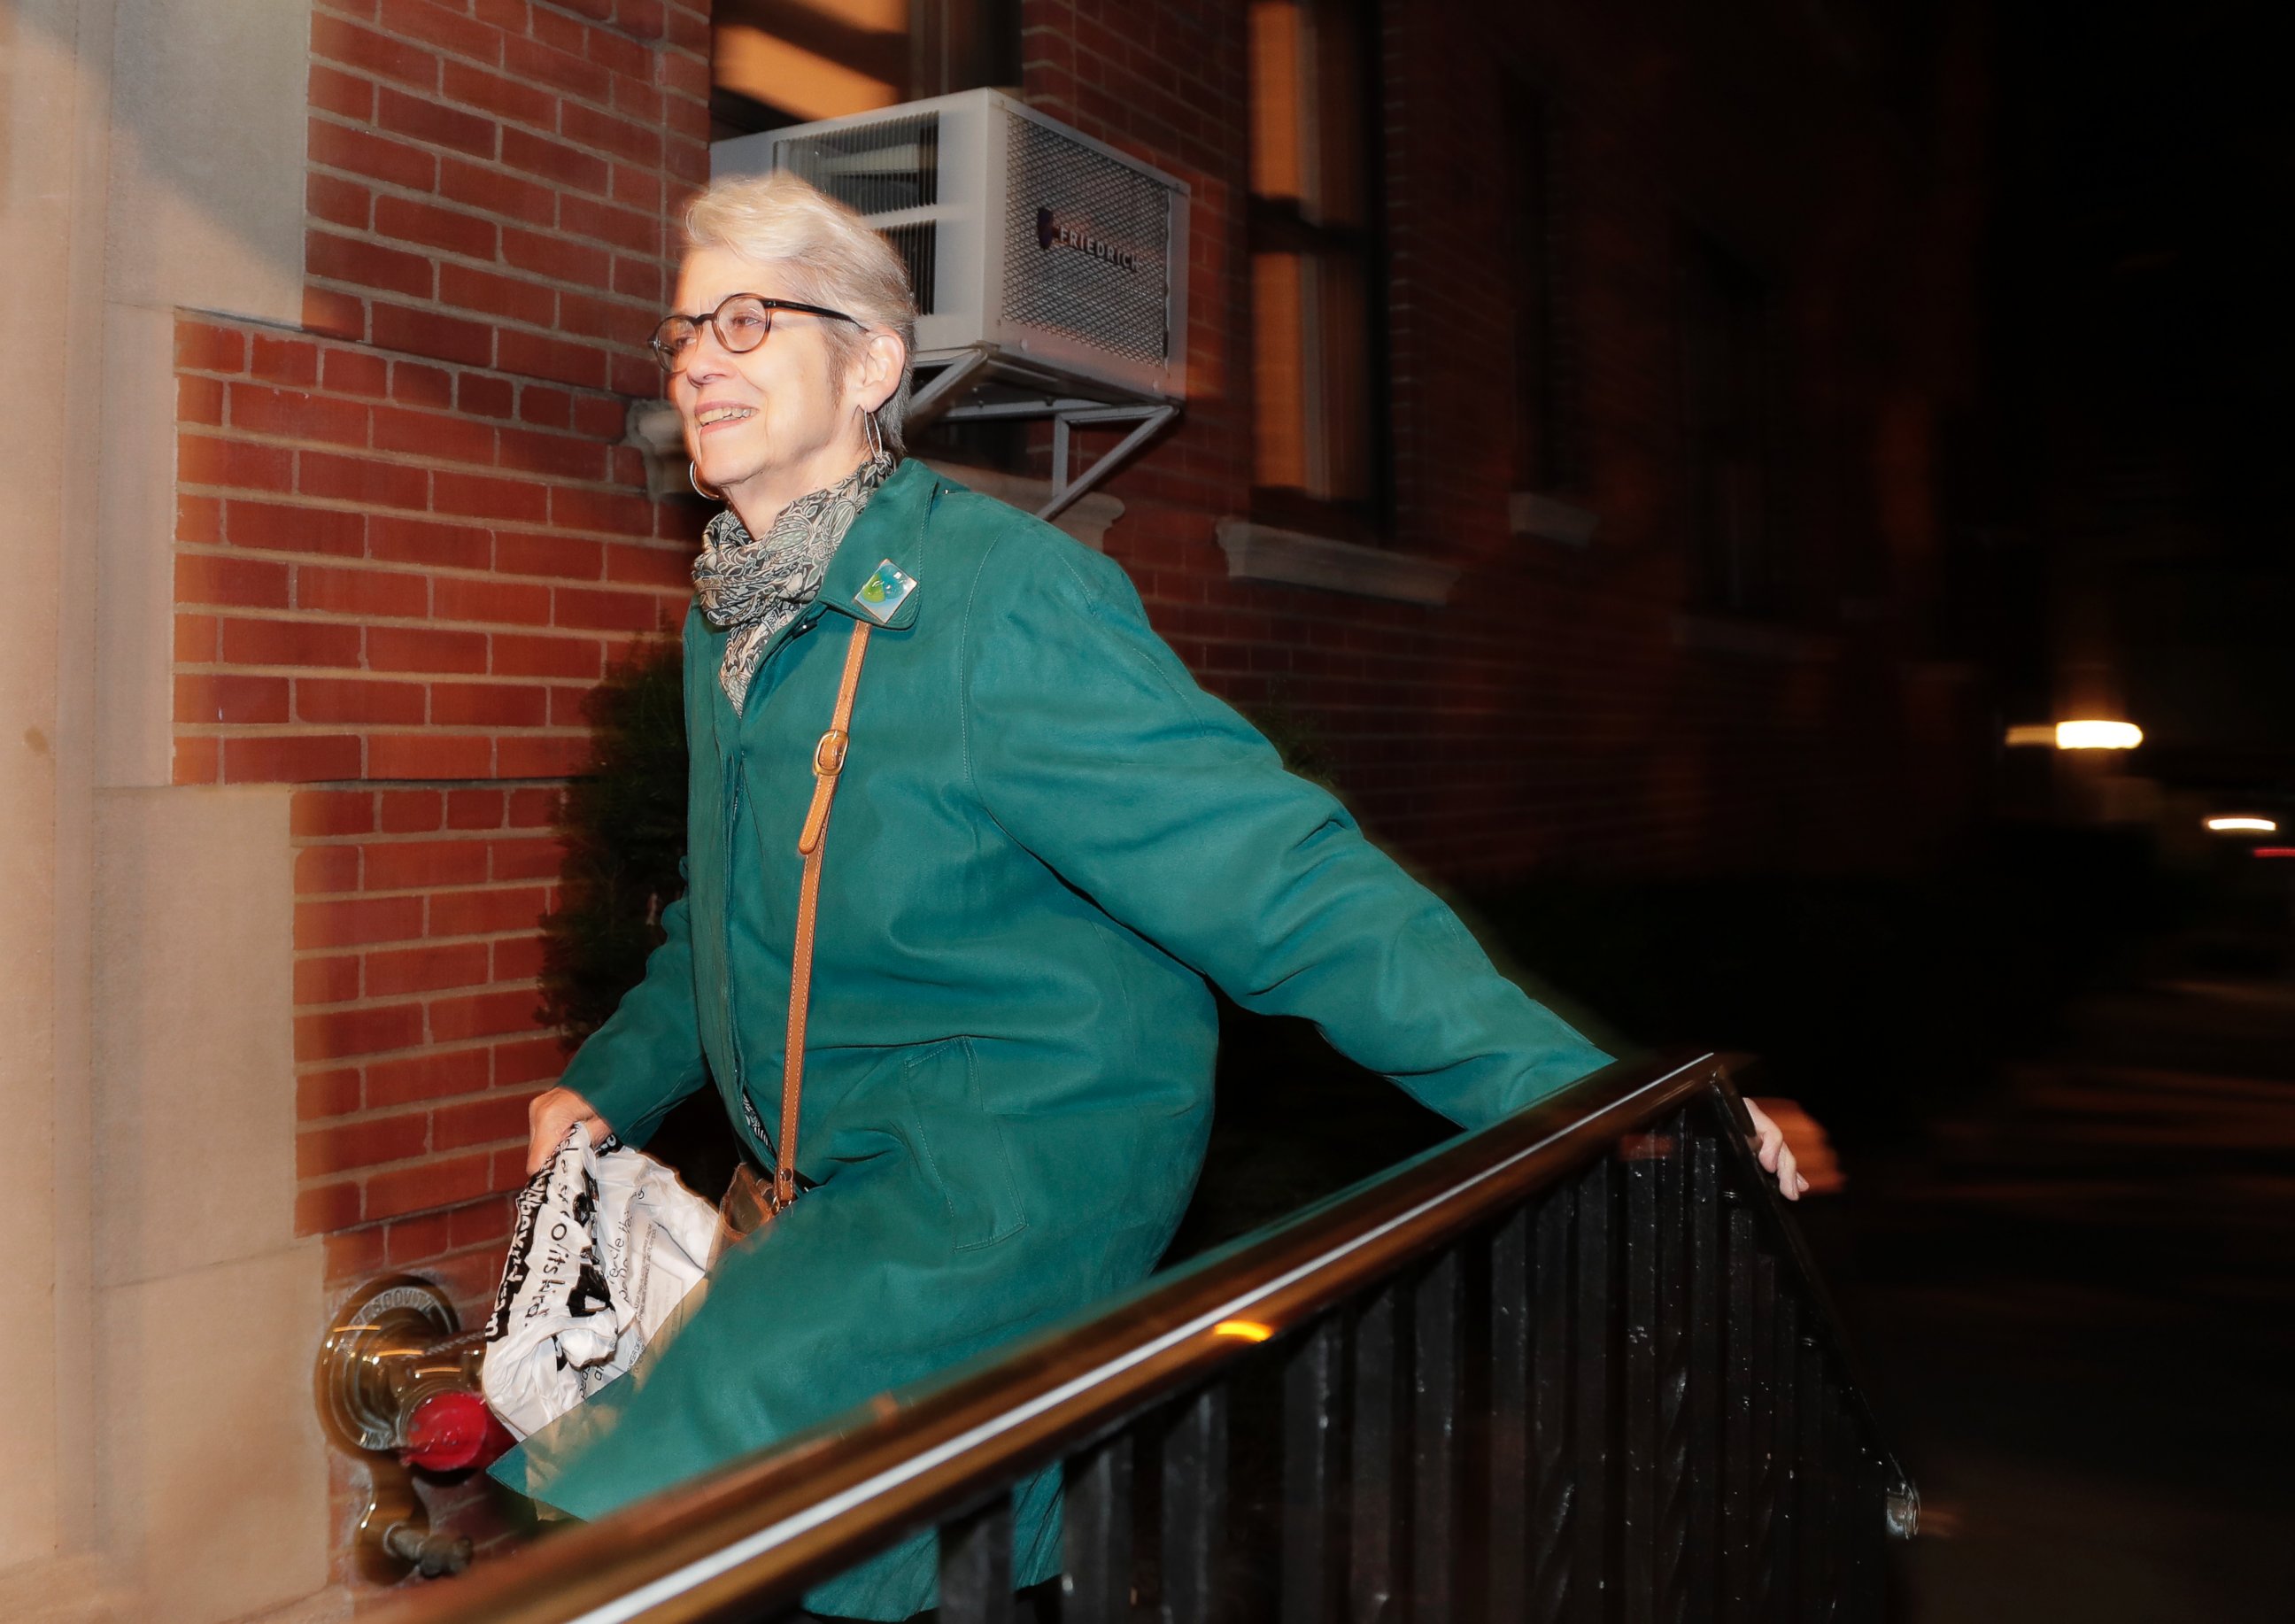 PHOTO: Jessica Leeds arrives at her apartment building, Wednesday, Oct. 12, 2016, in New York. Leeds was one of two women who told the New York Times that Republican presidential candidate Donald Trump touched her inappropriately.